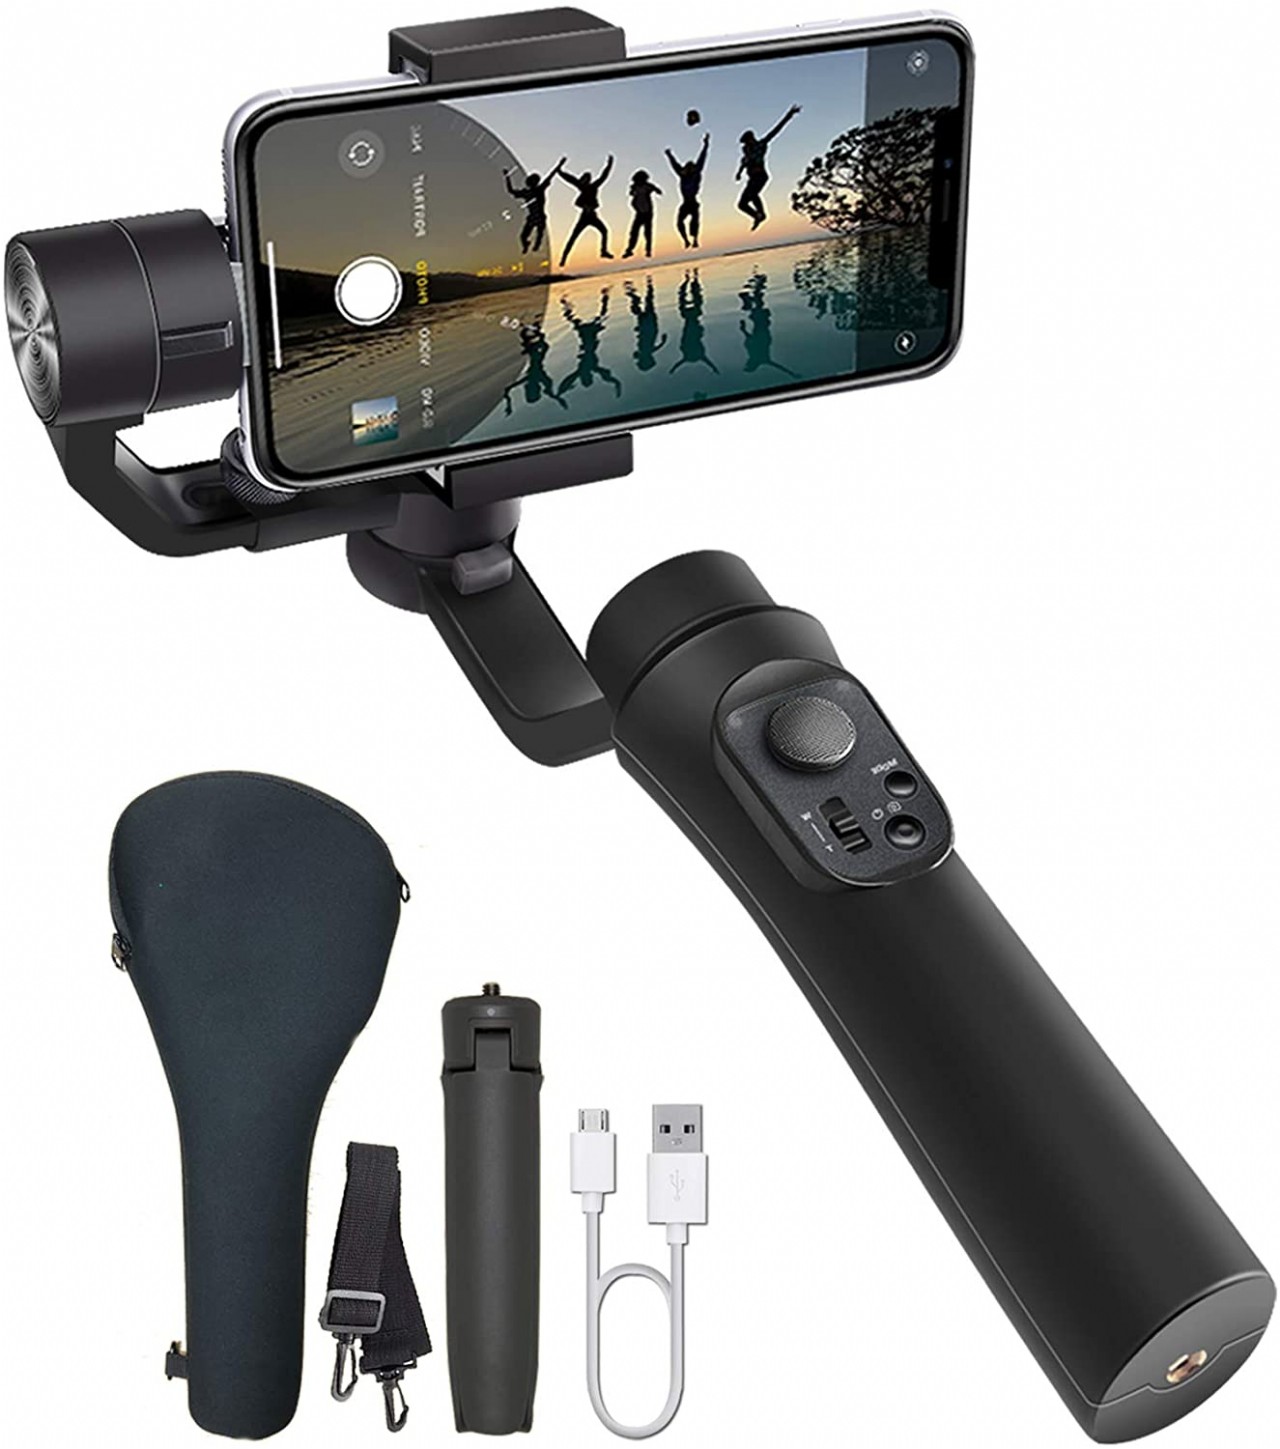 Motorized 3-Axis Smartphone Handheld Gimbal Stabilizer for Smooth Video Capture 360 Degrees Pan